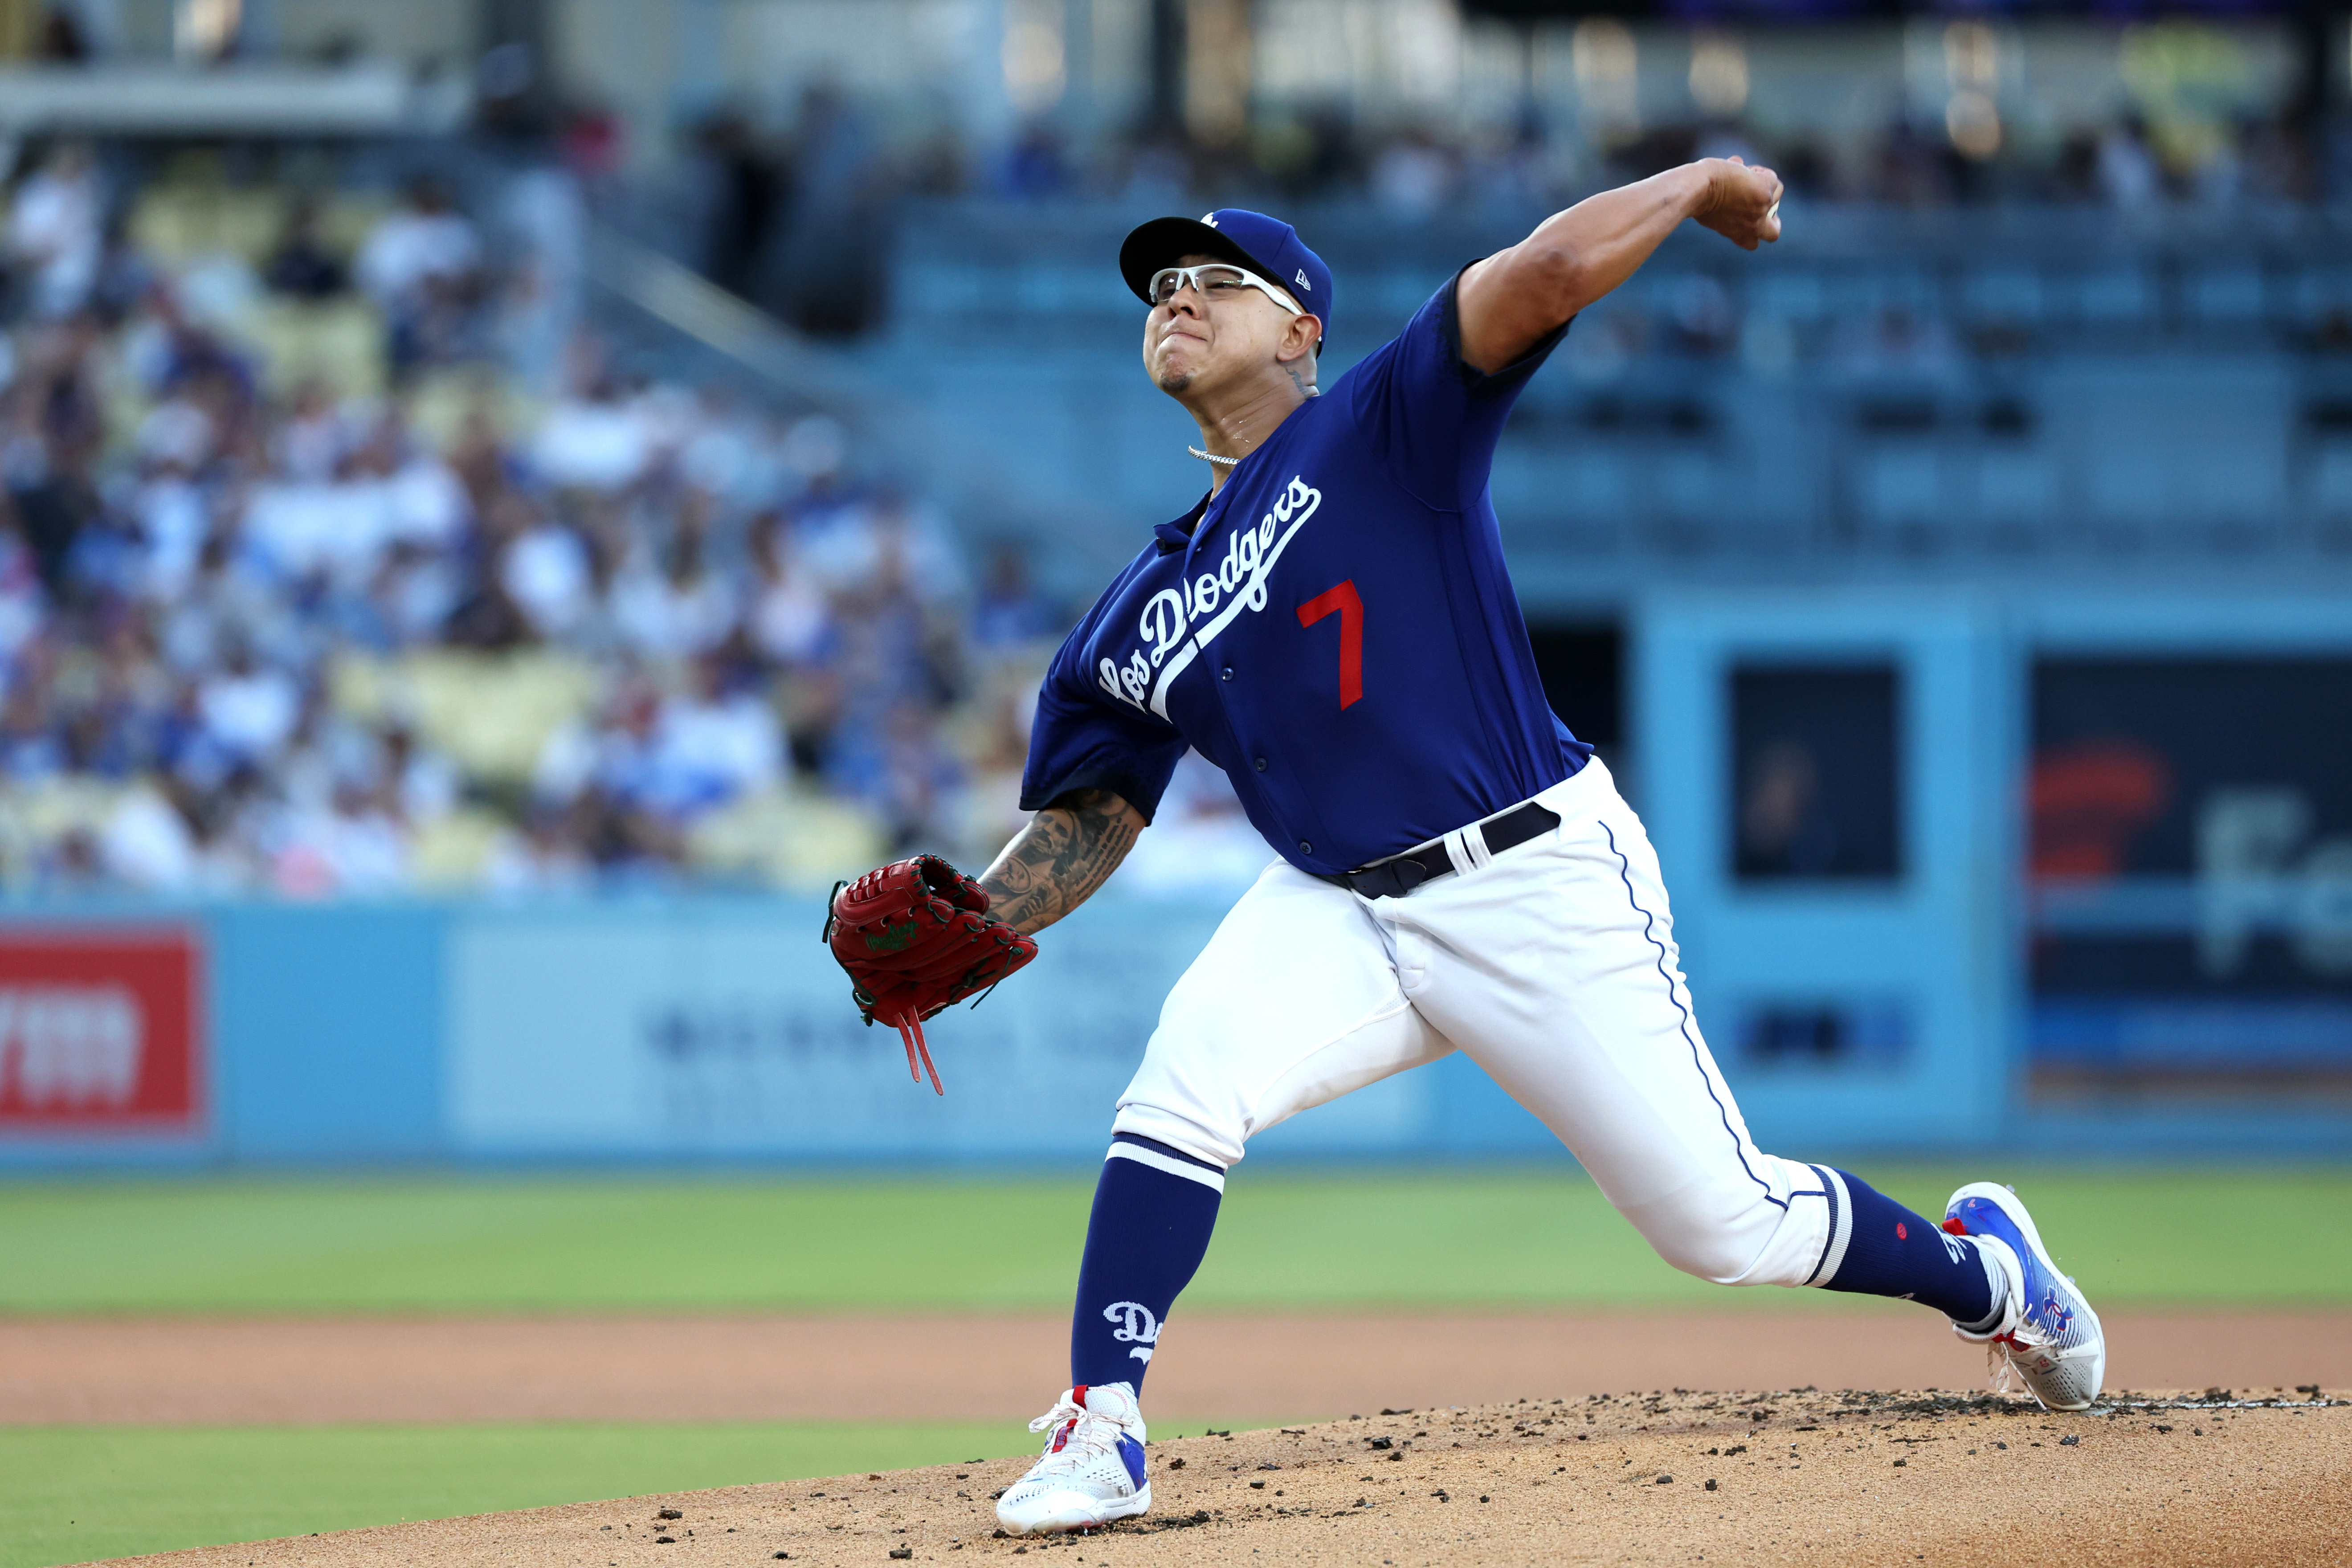 Julio Urías' contributions resonate with a city, a country and a